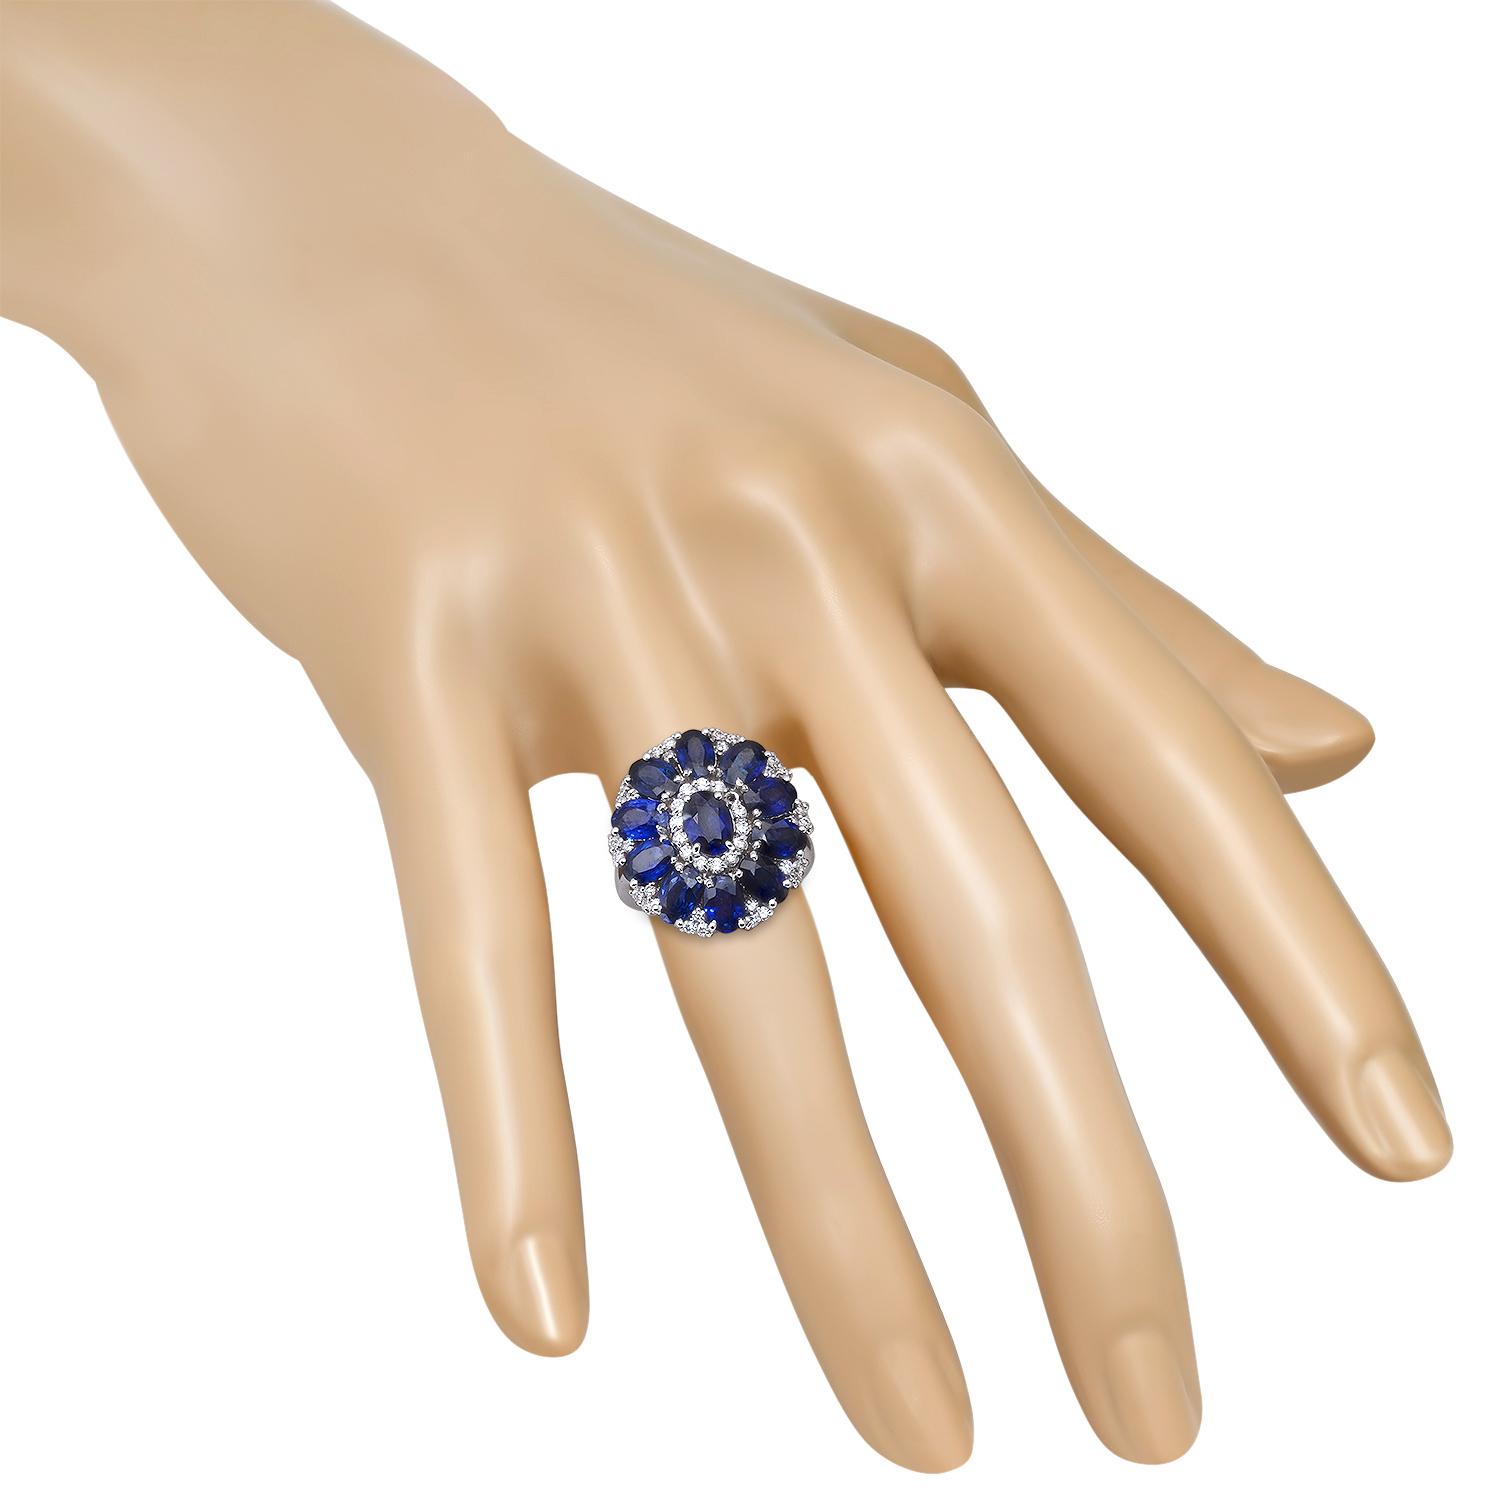 14K White Gold Setting with 5.86ct Sapphire and 0.68ct Diamond Ladies Ring